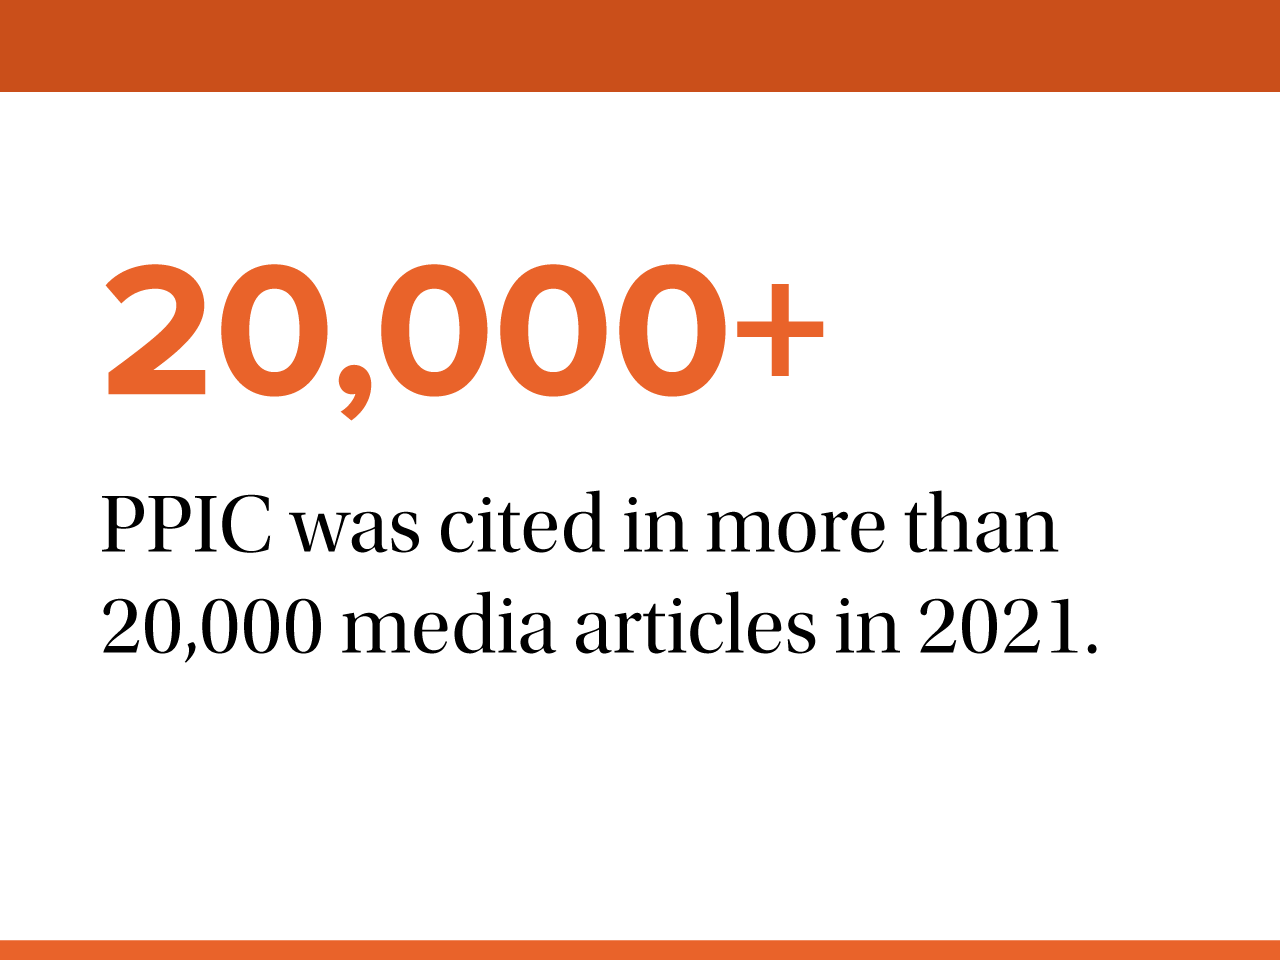 fact - PPIC event videos attracted more than 20,000 viewers.